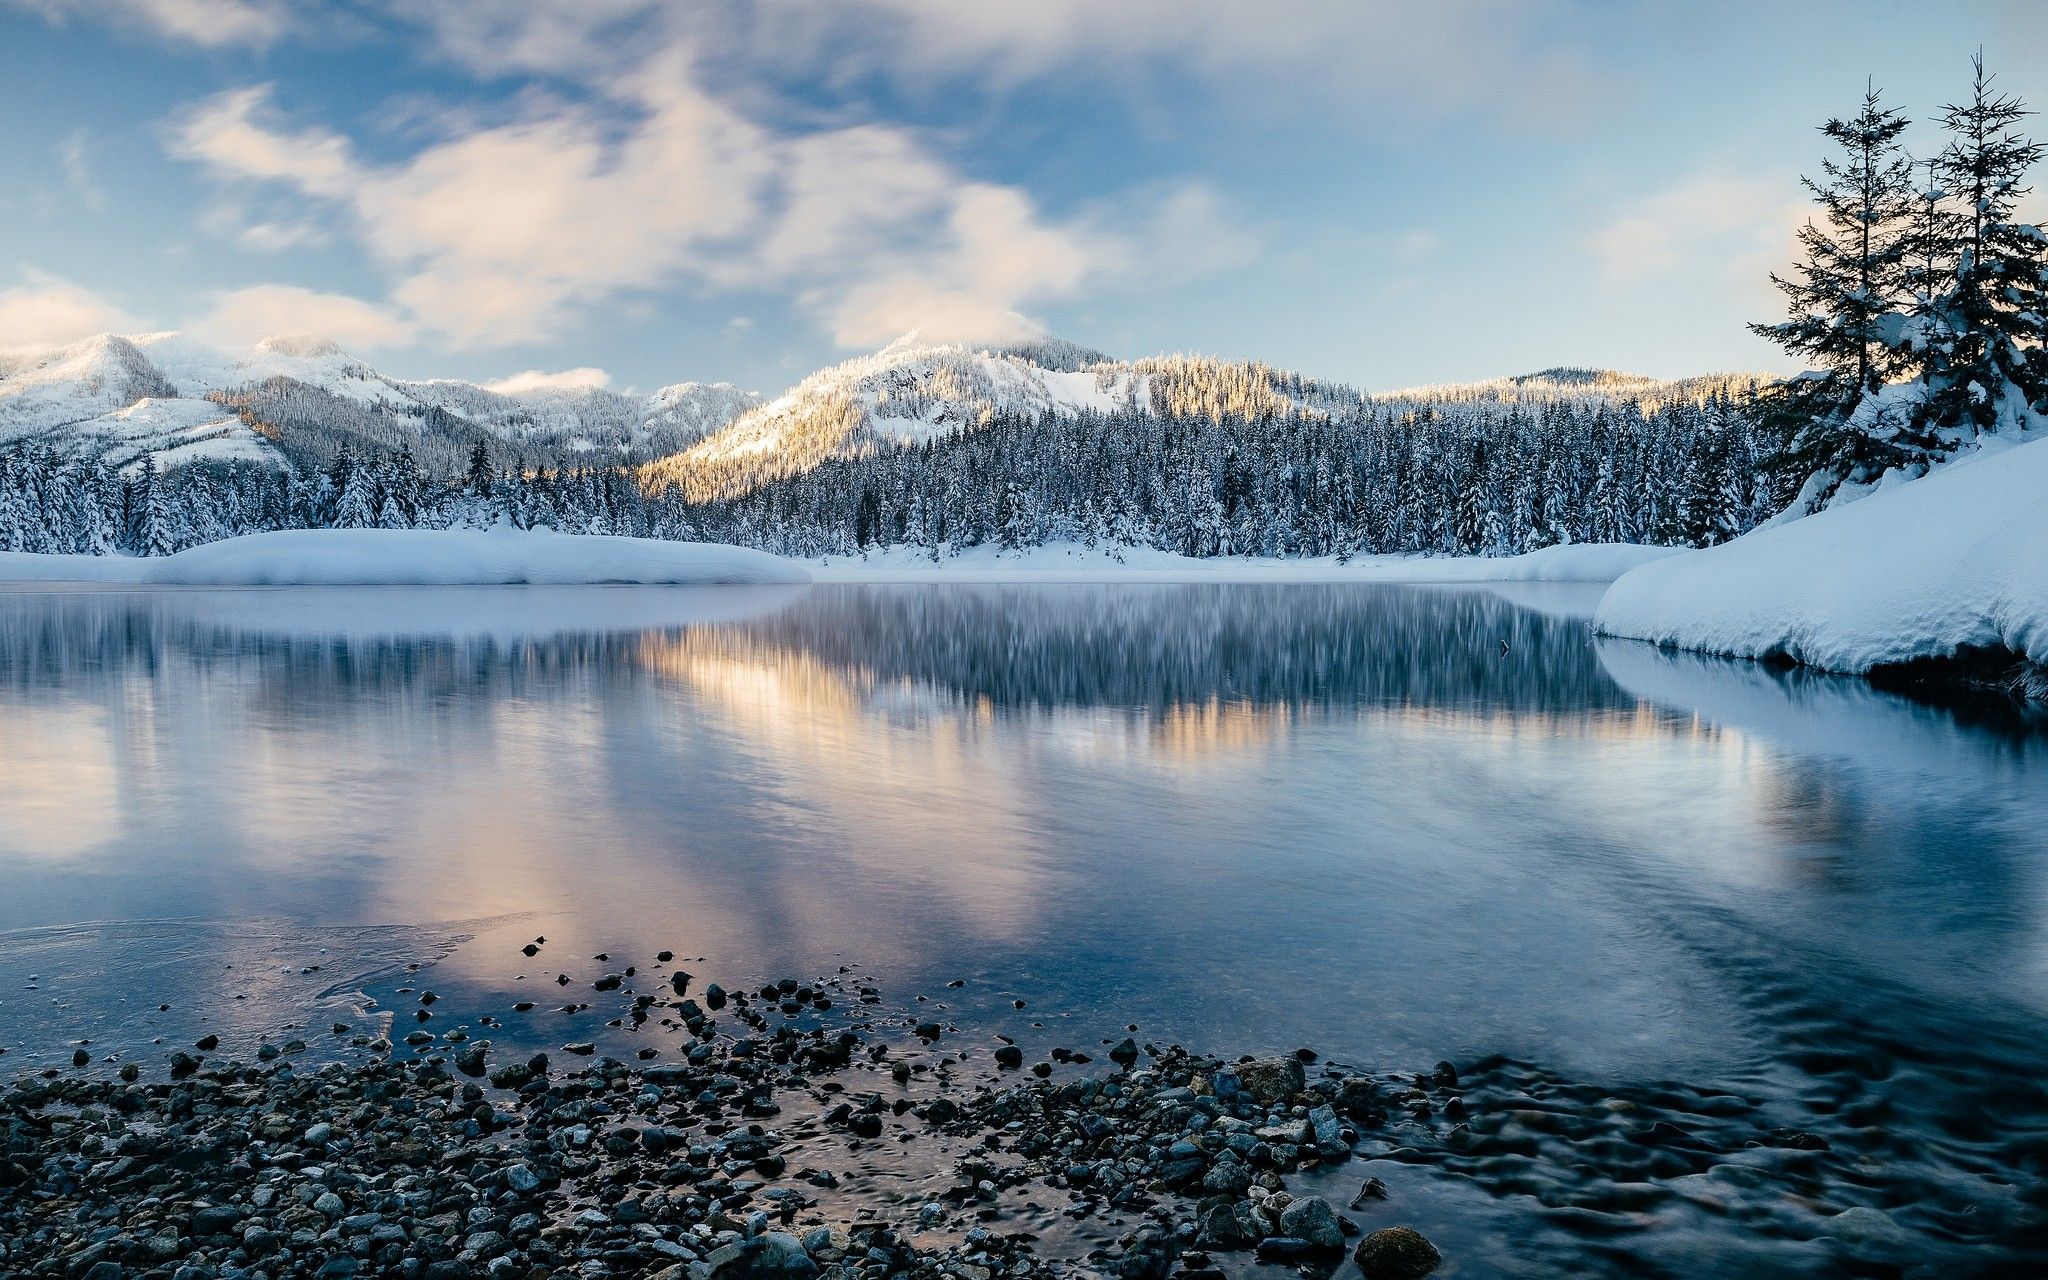 #snow, #nature, #forest, #landscape, #mountains, #lake